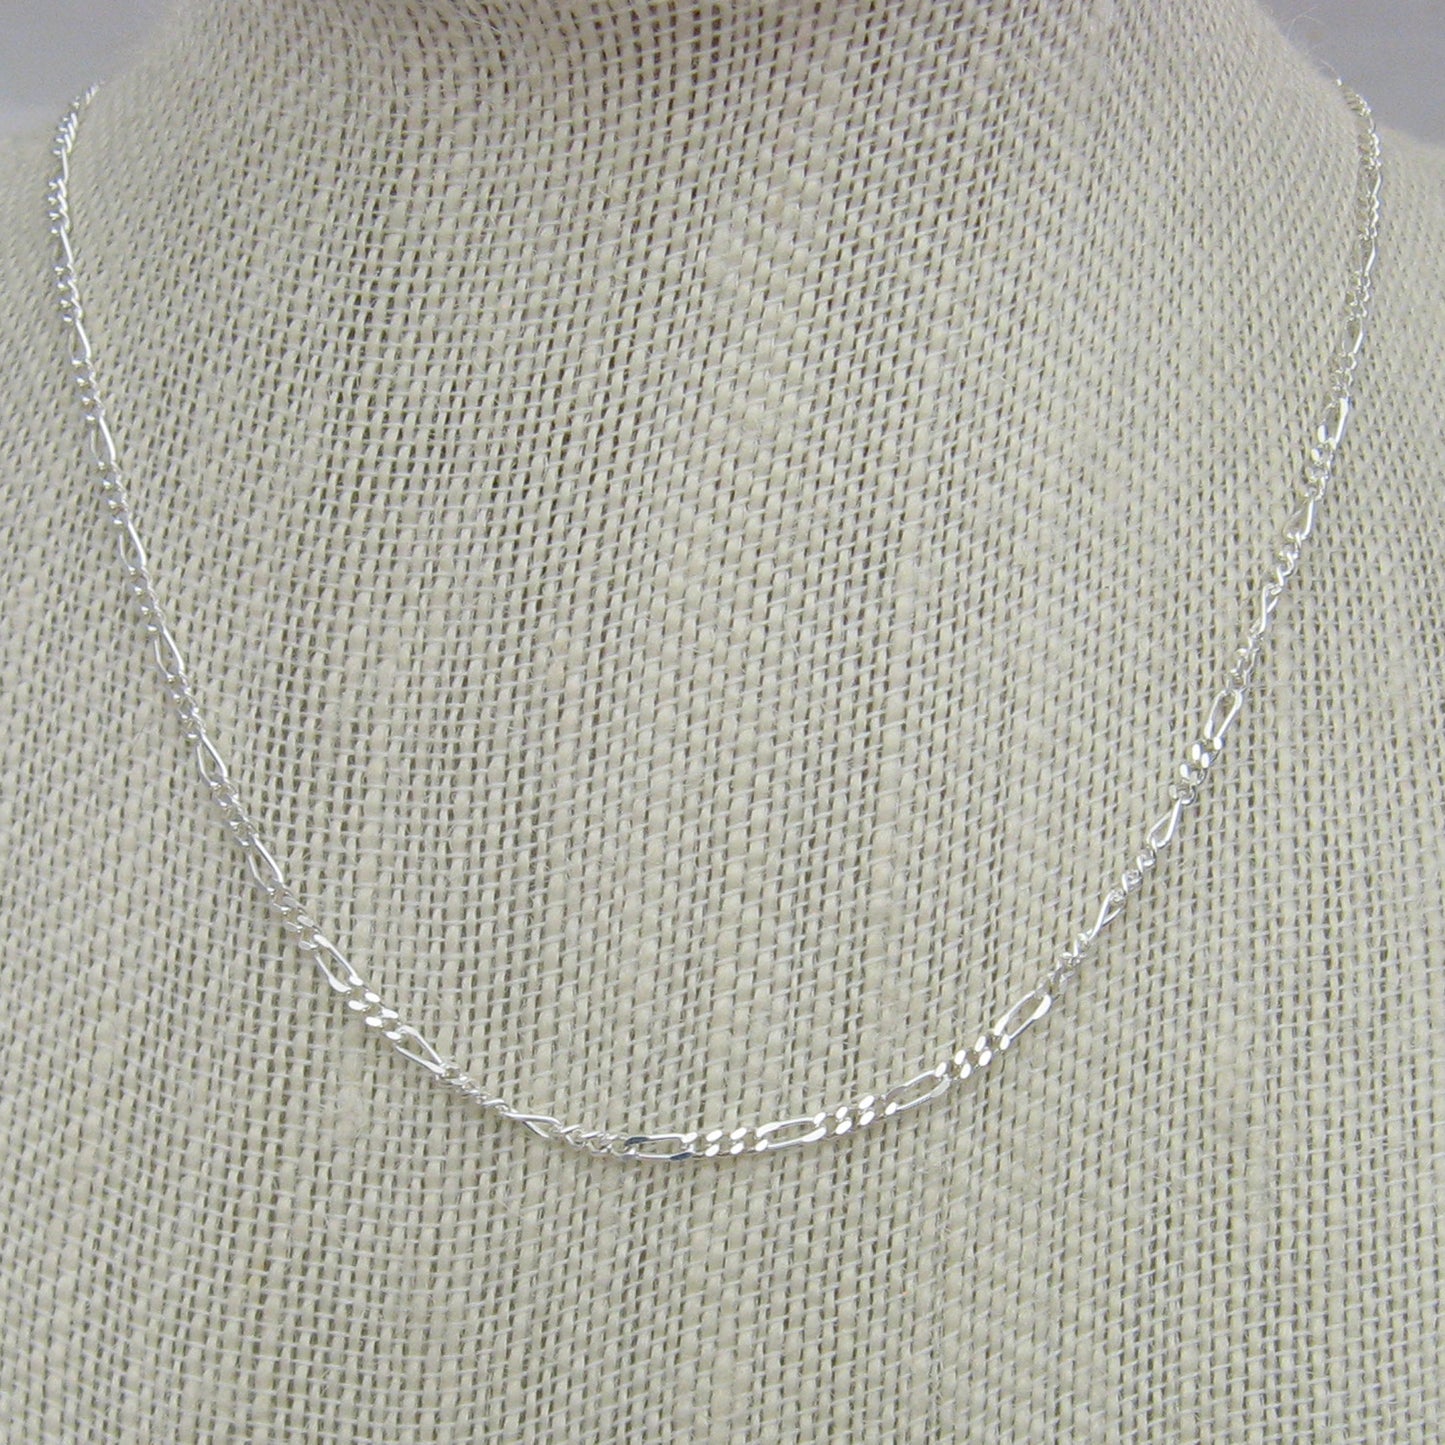 Sterling Silver 3+1 Figaro Chain Necklace